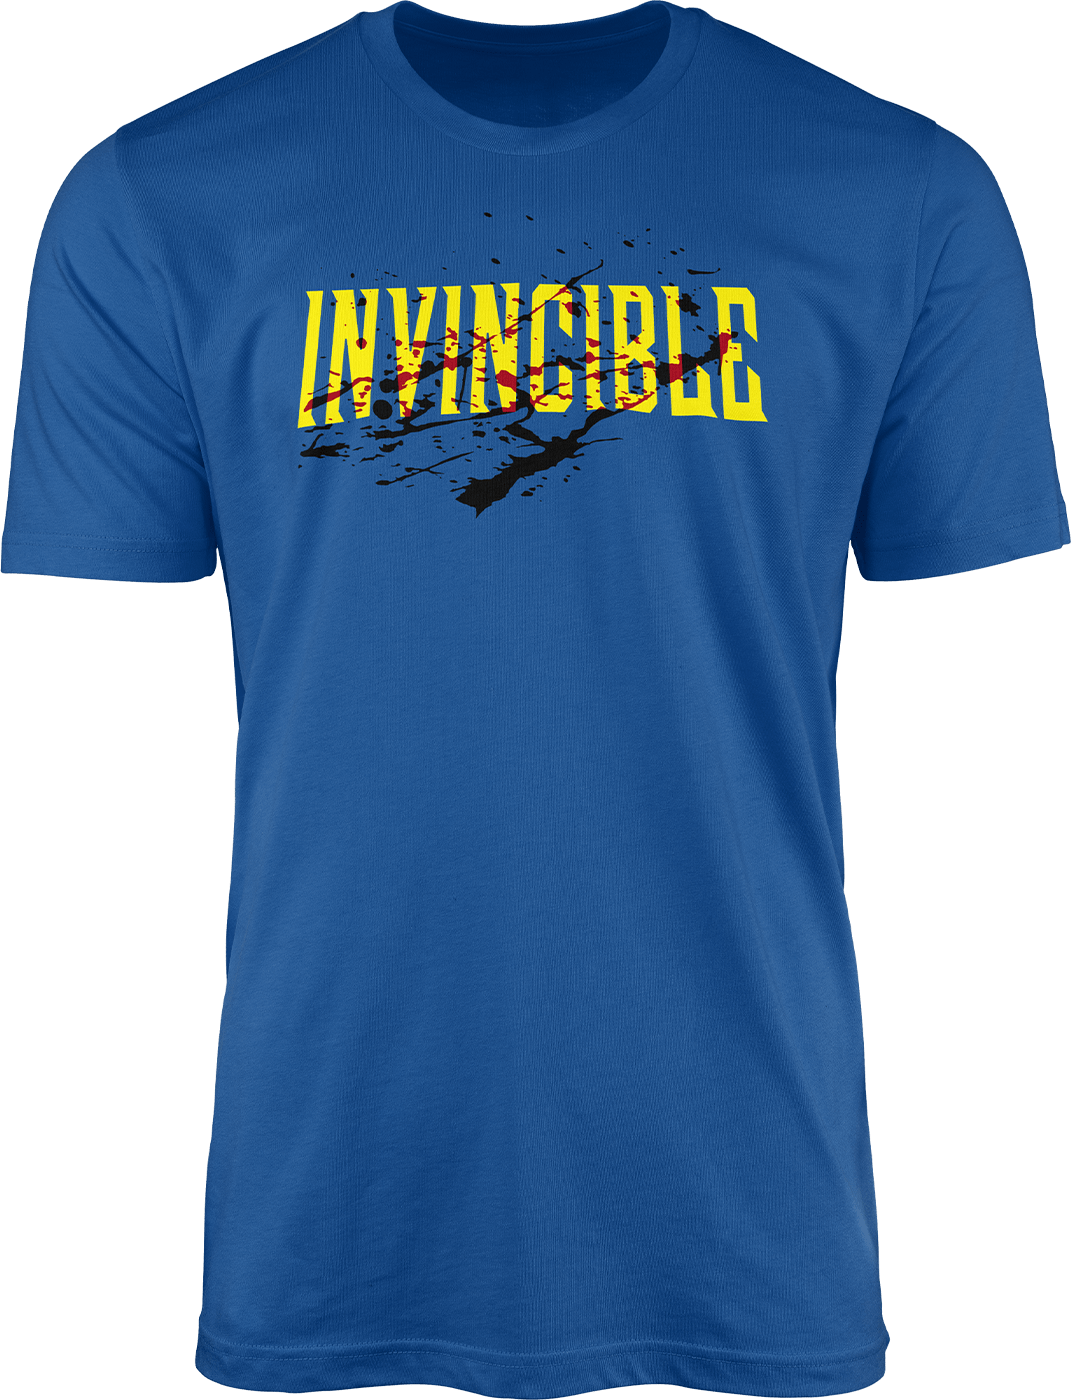 Skybound  Invincible Bloody Logo - T-Shirt – Skybound Entertainment